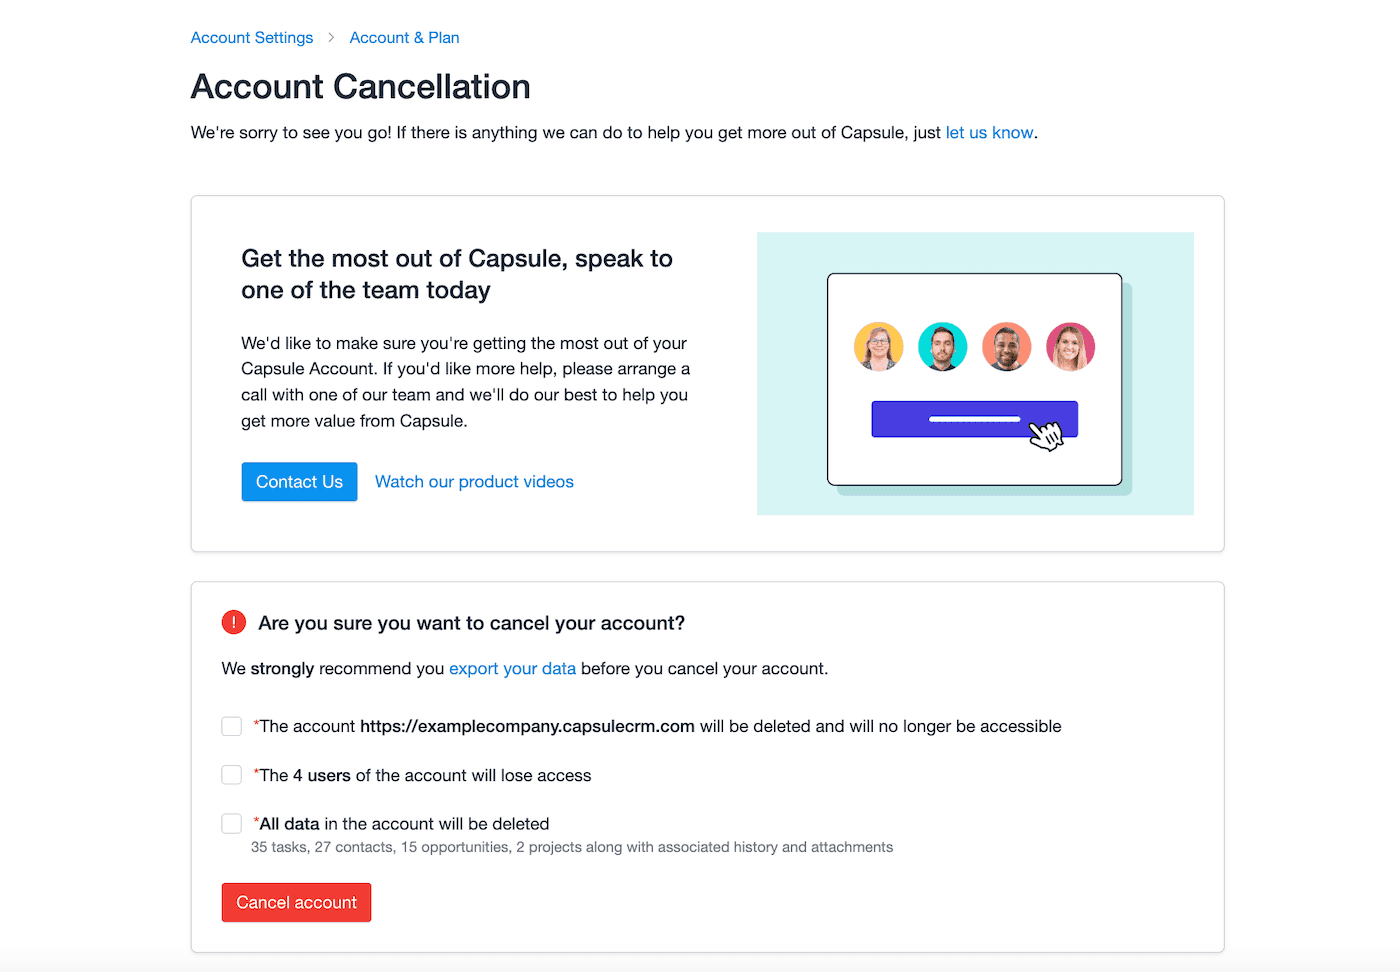 Cancel account area on the account settings page displaying checkboxes with account information before final confirmation